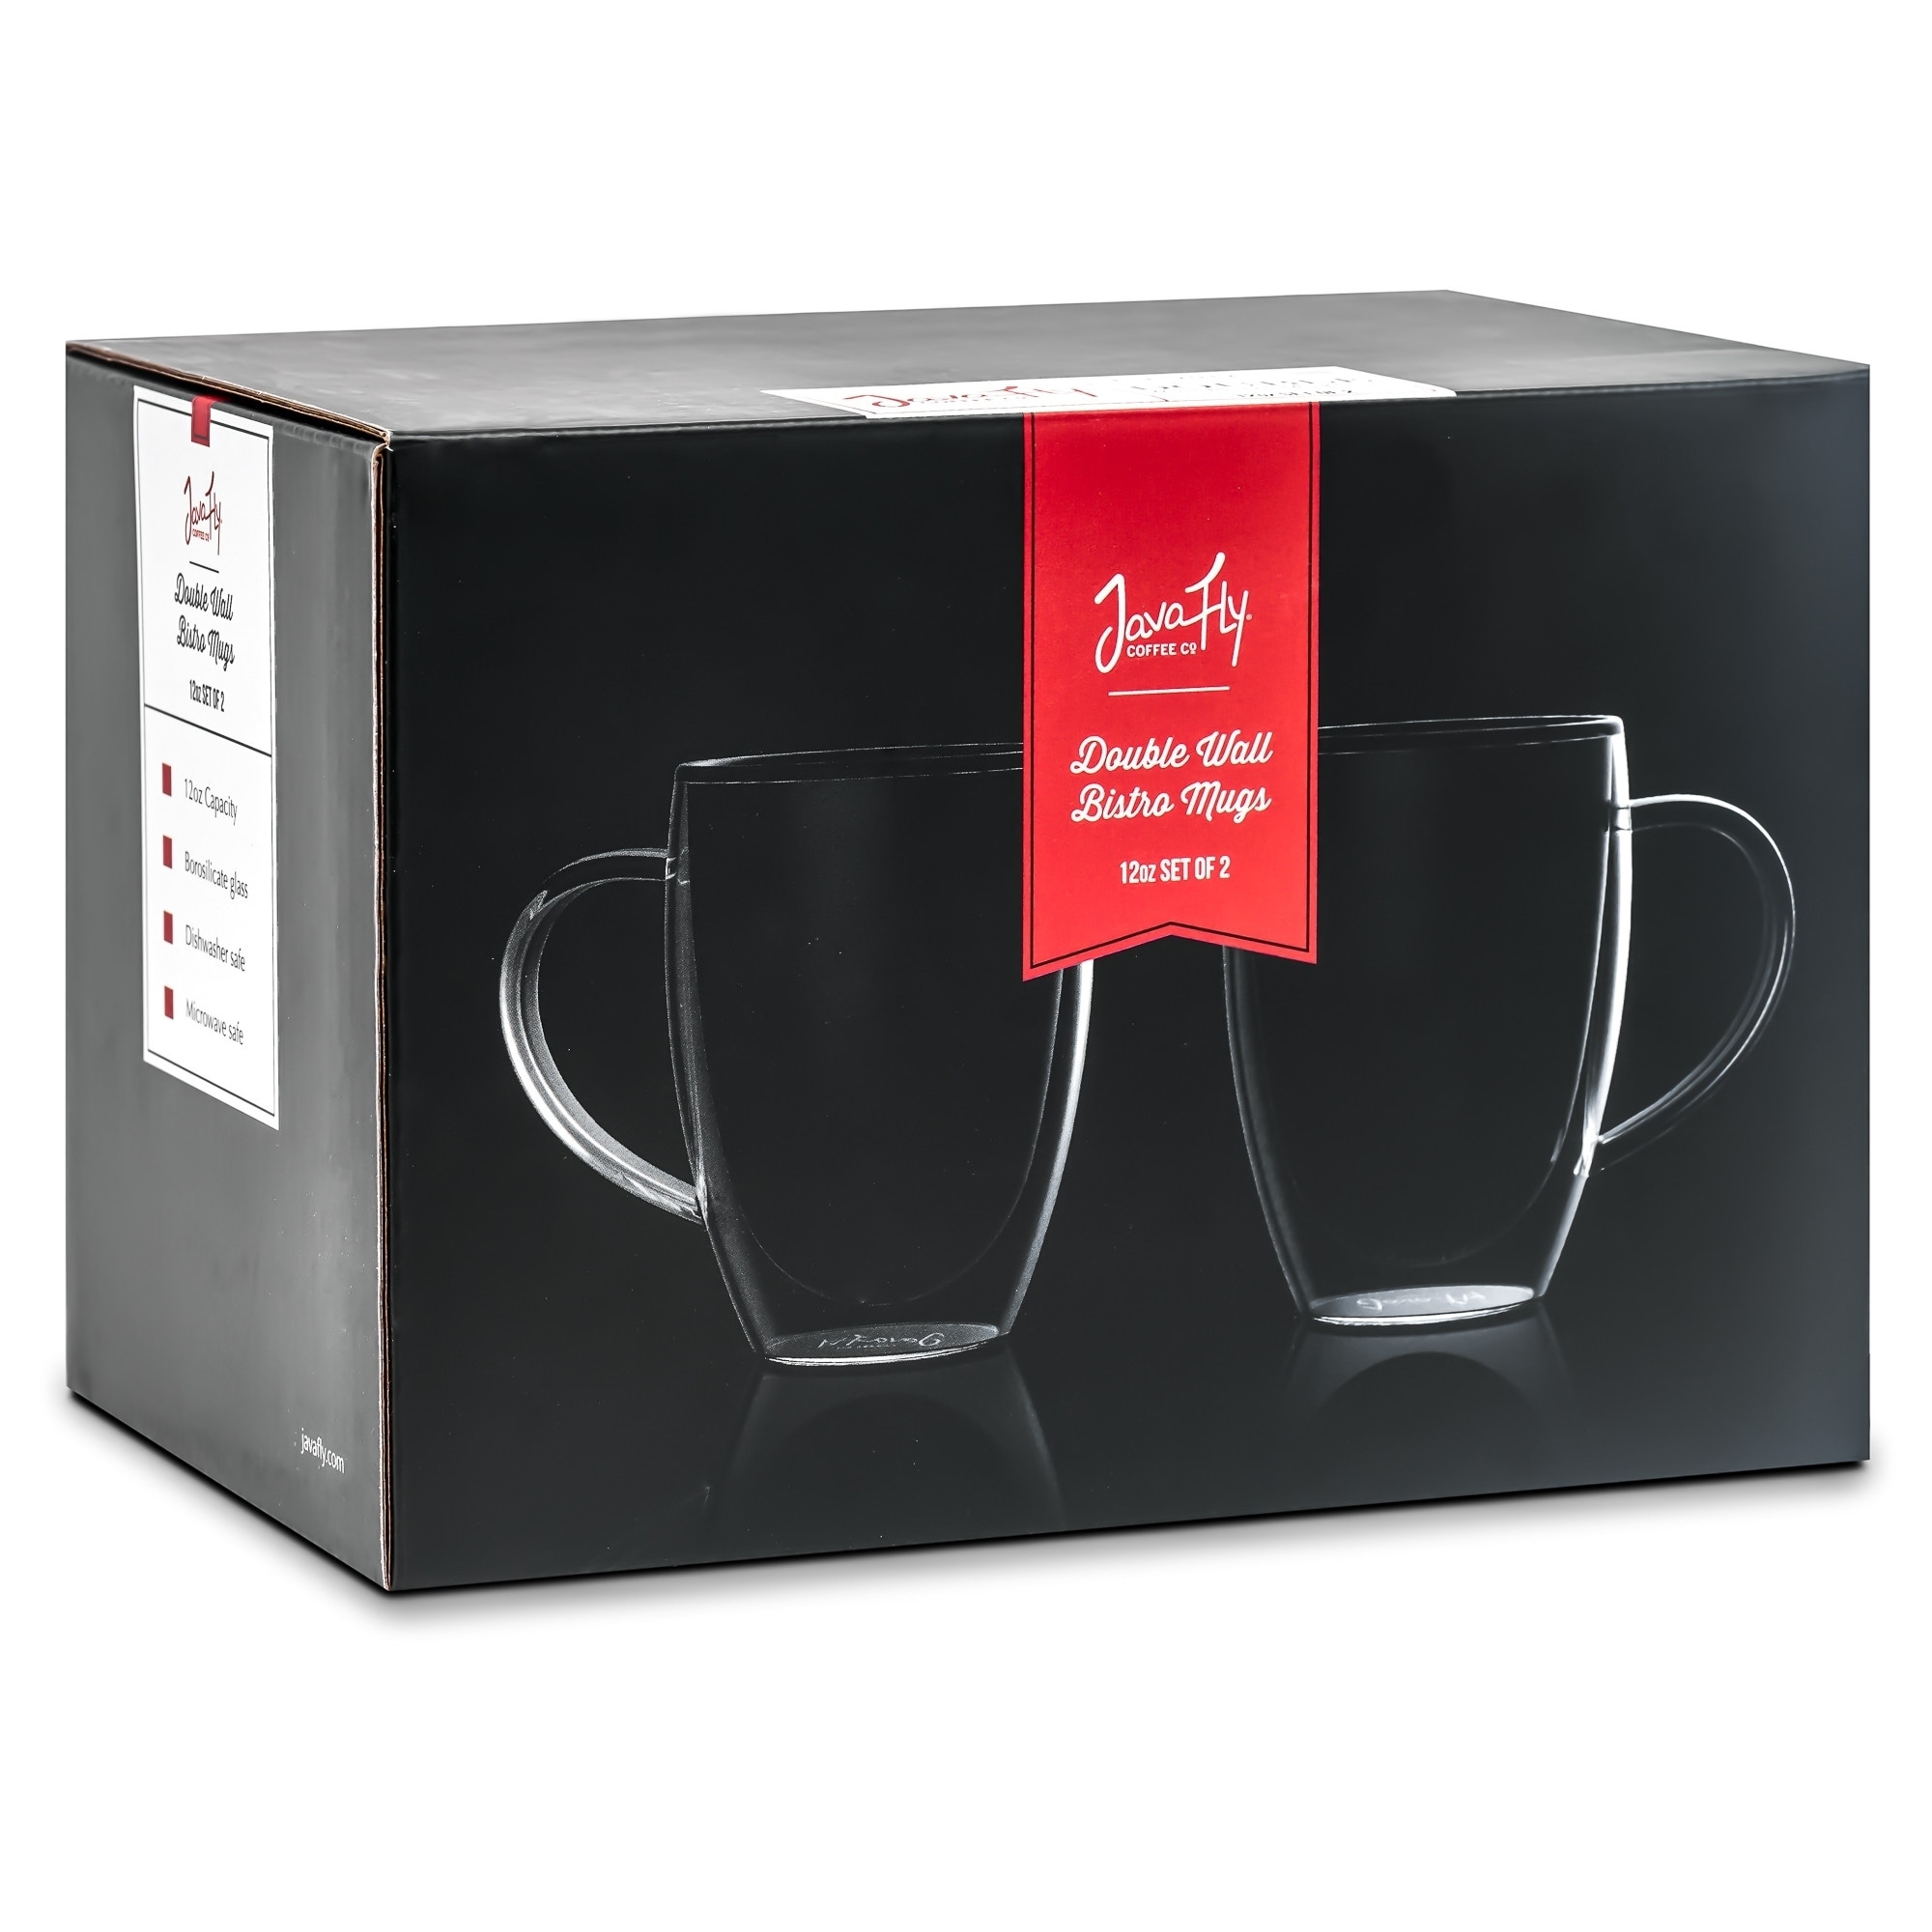 https://ak1.ostkcdn.com/images/products/14427905/JavaFly-Clear-Glass-12-ounce-Double-walled-Thermo-Bistro-Mug-with-Handle-Set-of-2-72ee209d-f931-48a6-a76d-ab591497b58c.jpg